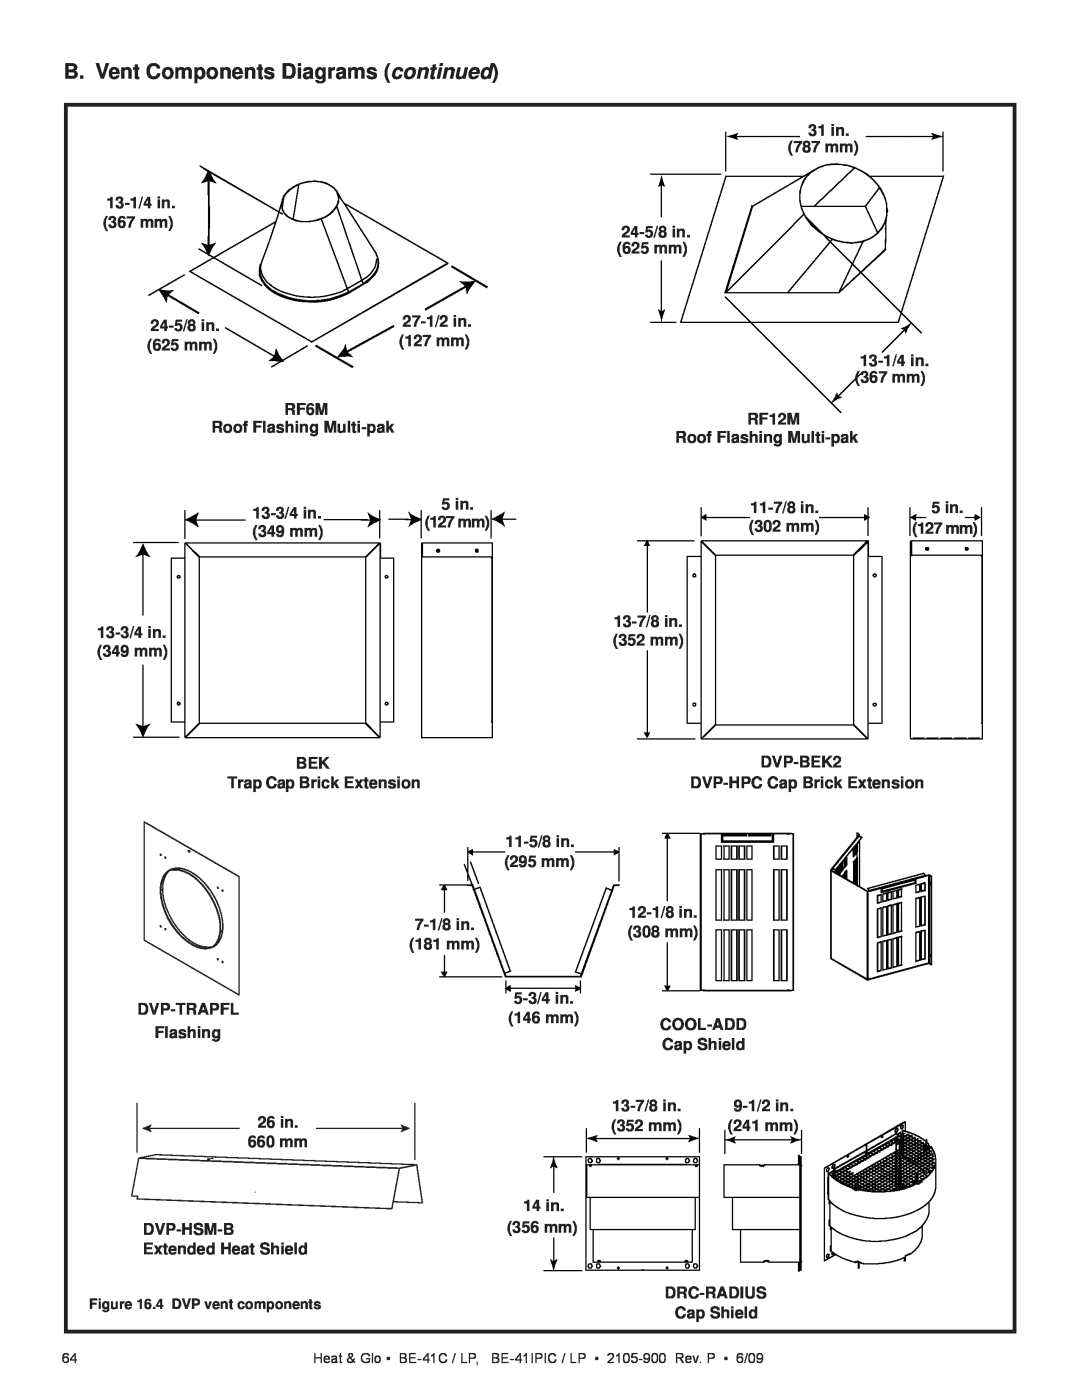 Heat & Glo LifeStyle BE-41C B. Vent Components Diagrams continued, 31 in, 787 mm, 13-1/4in, 367 mm, 24-5/8in, 625 mm, RF6M 